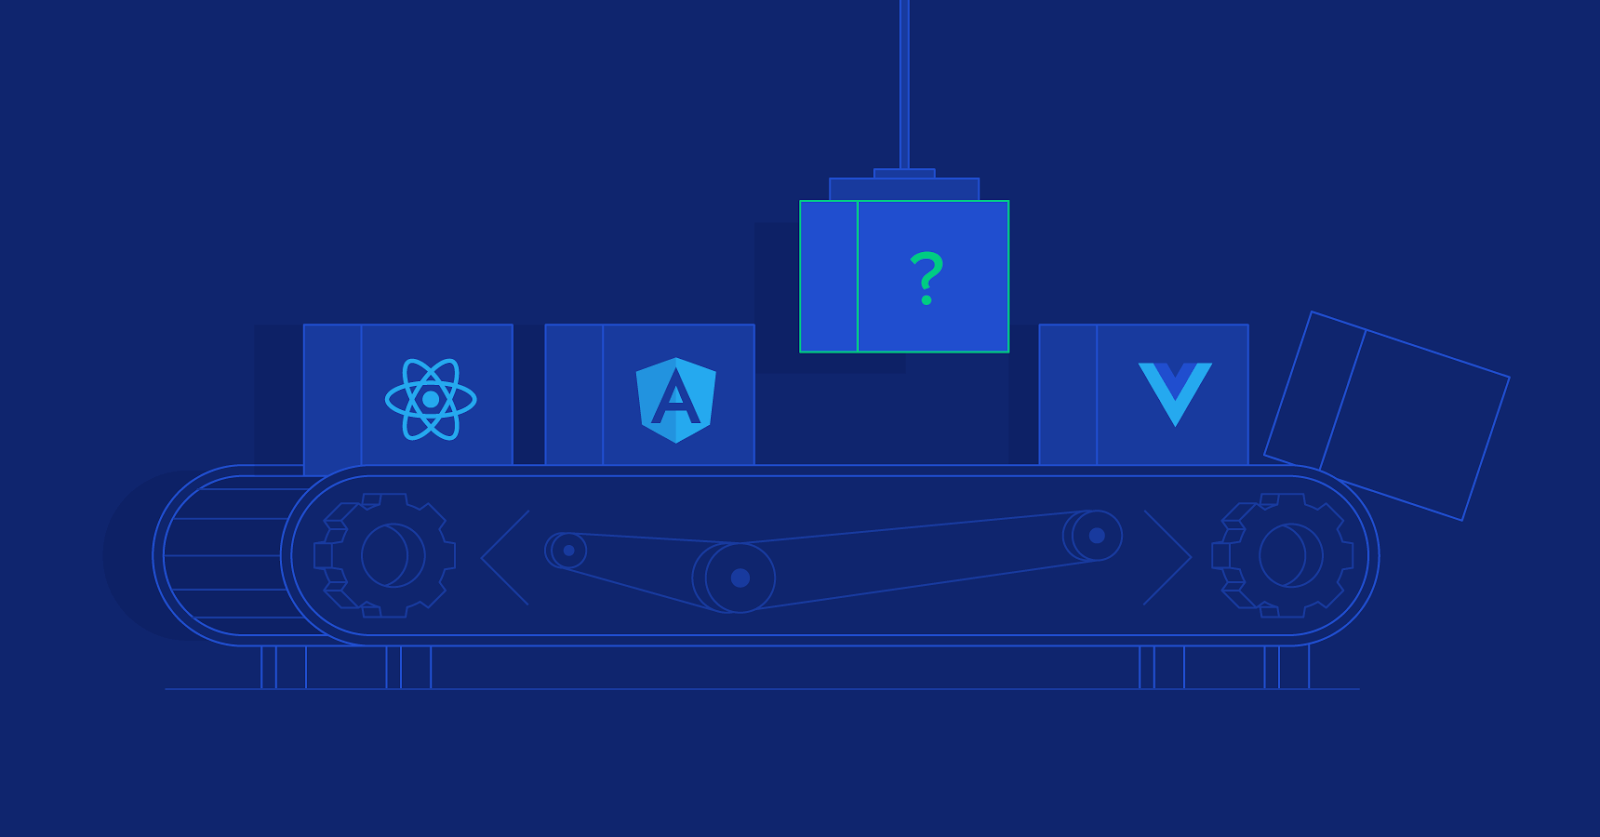 How to Choose the Best Front-end Framework